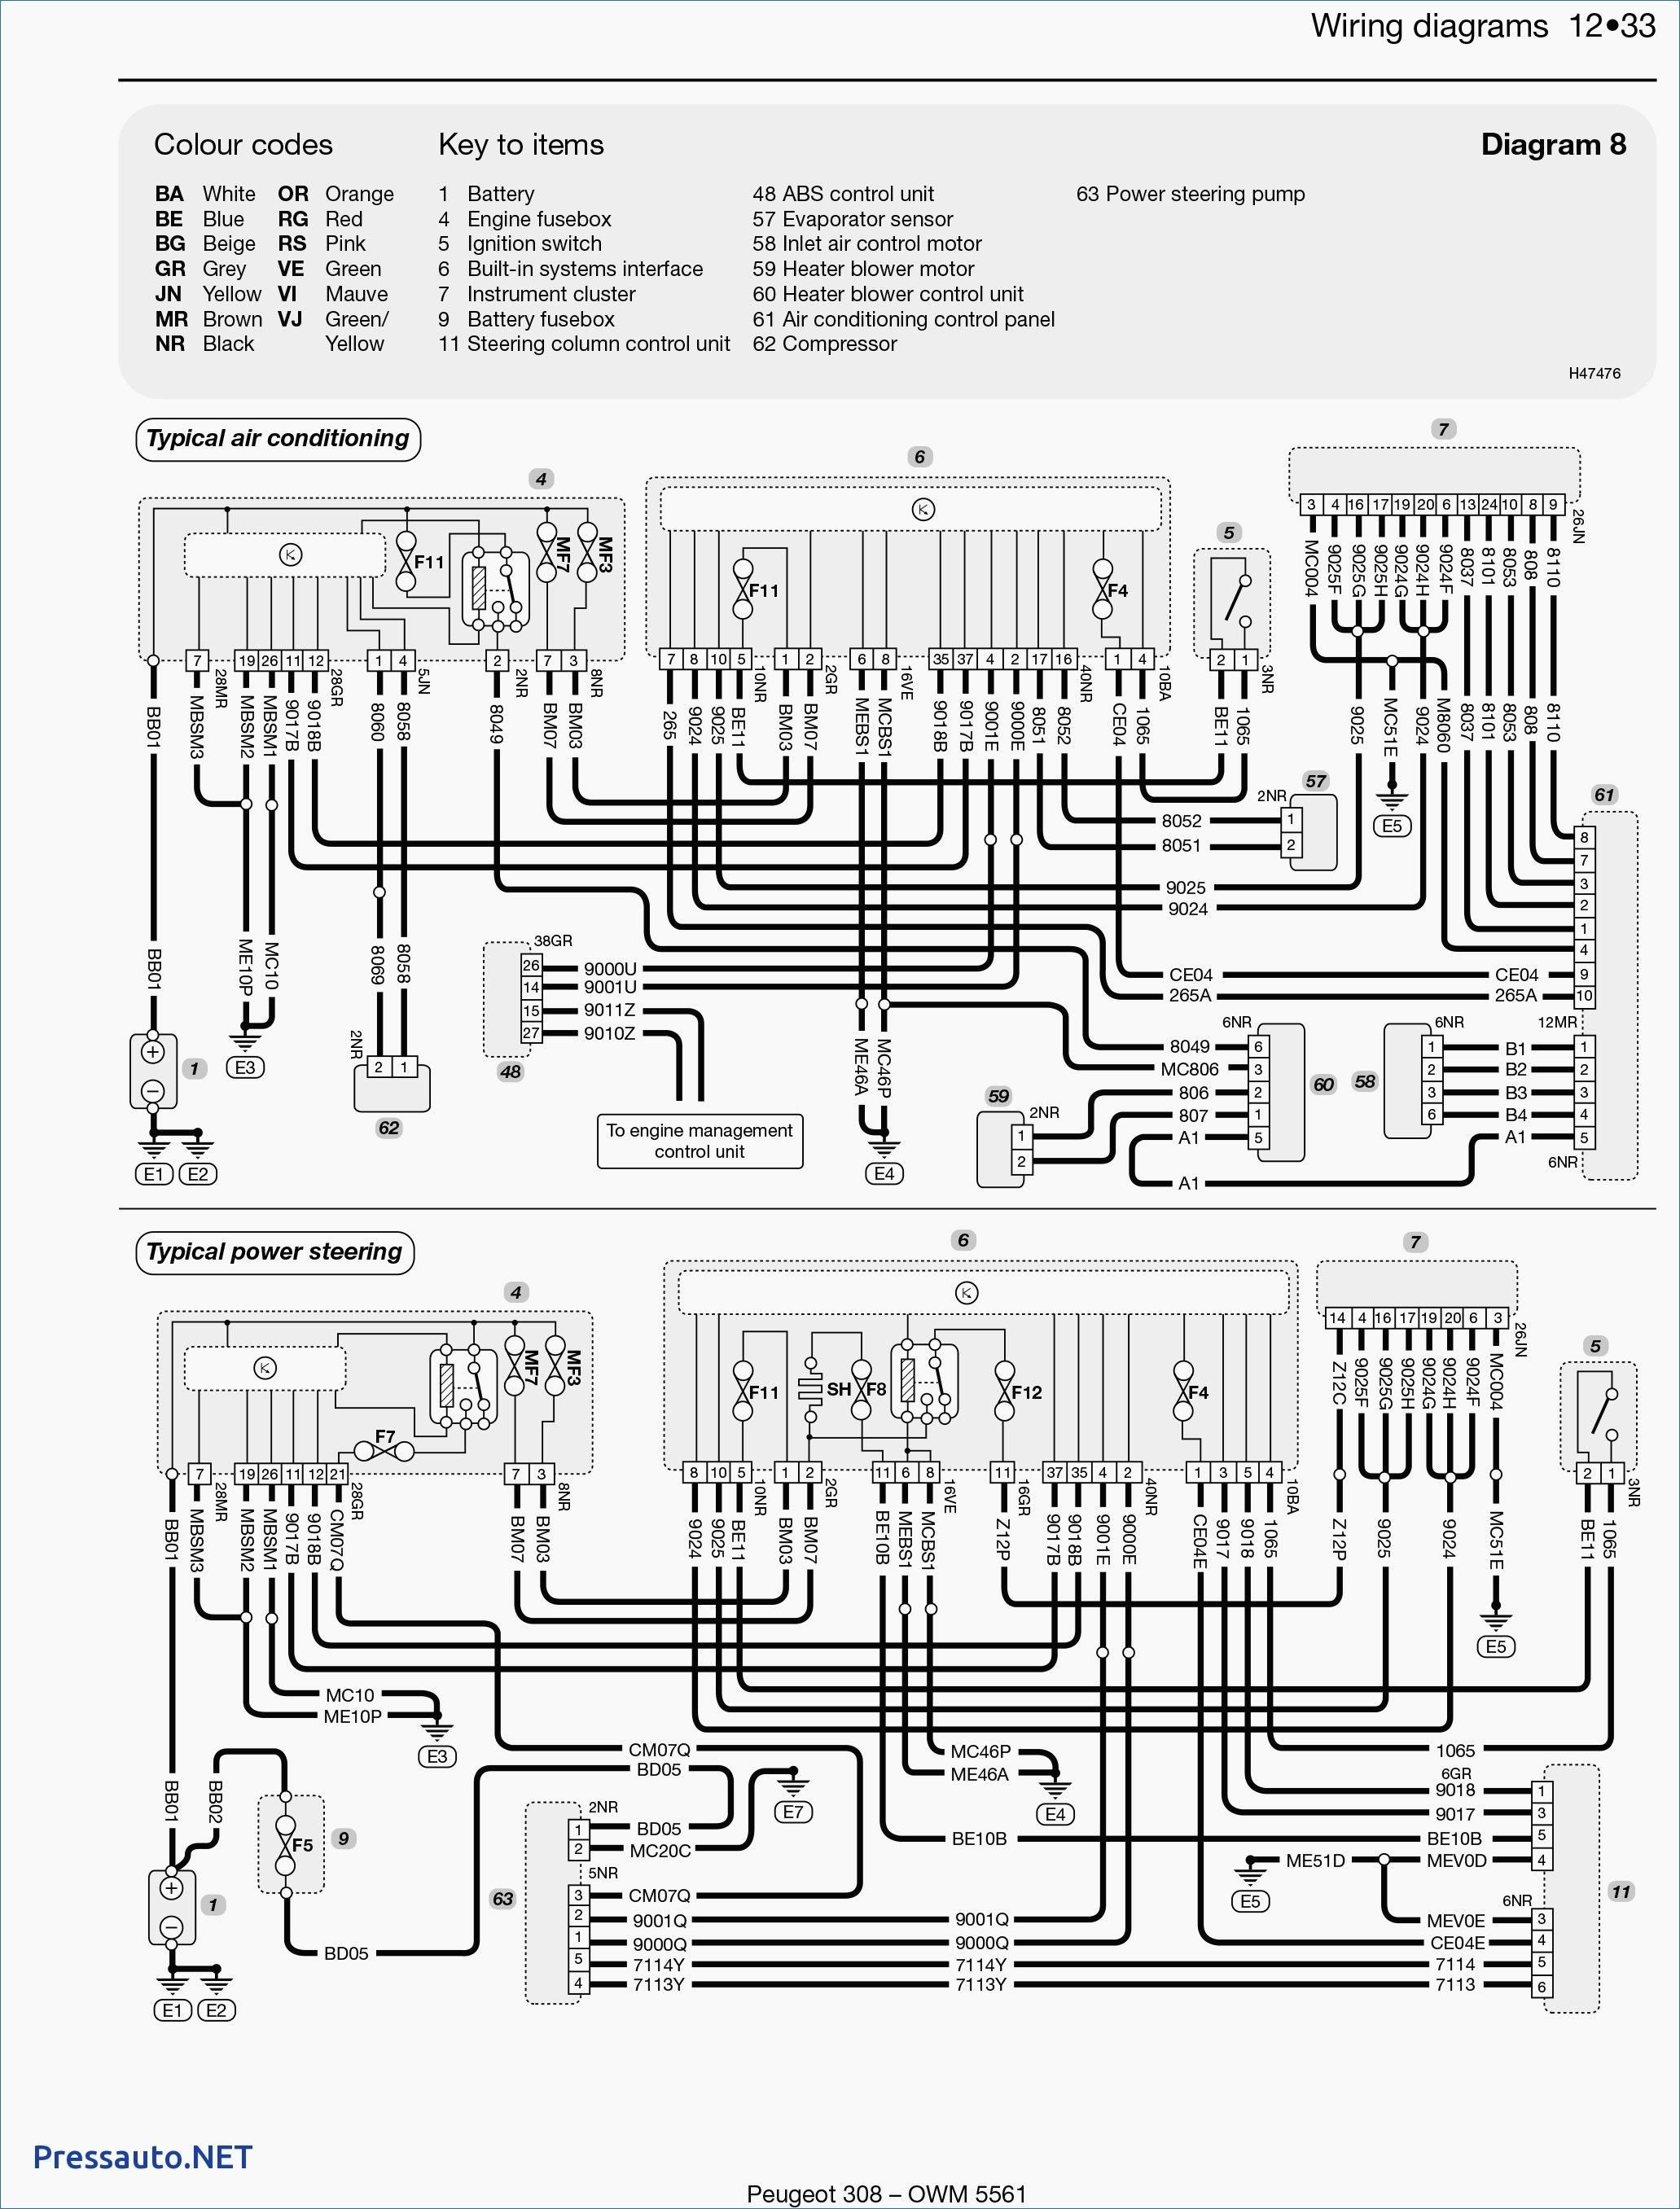 Peugeot 307 Hdi Engine Diagram Wiring Diagram for Peugeot 206 Stereo Best fortable In